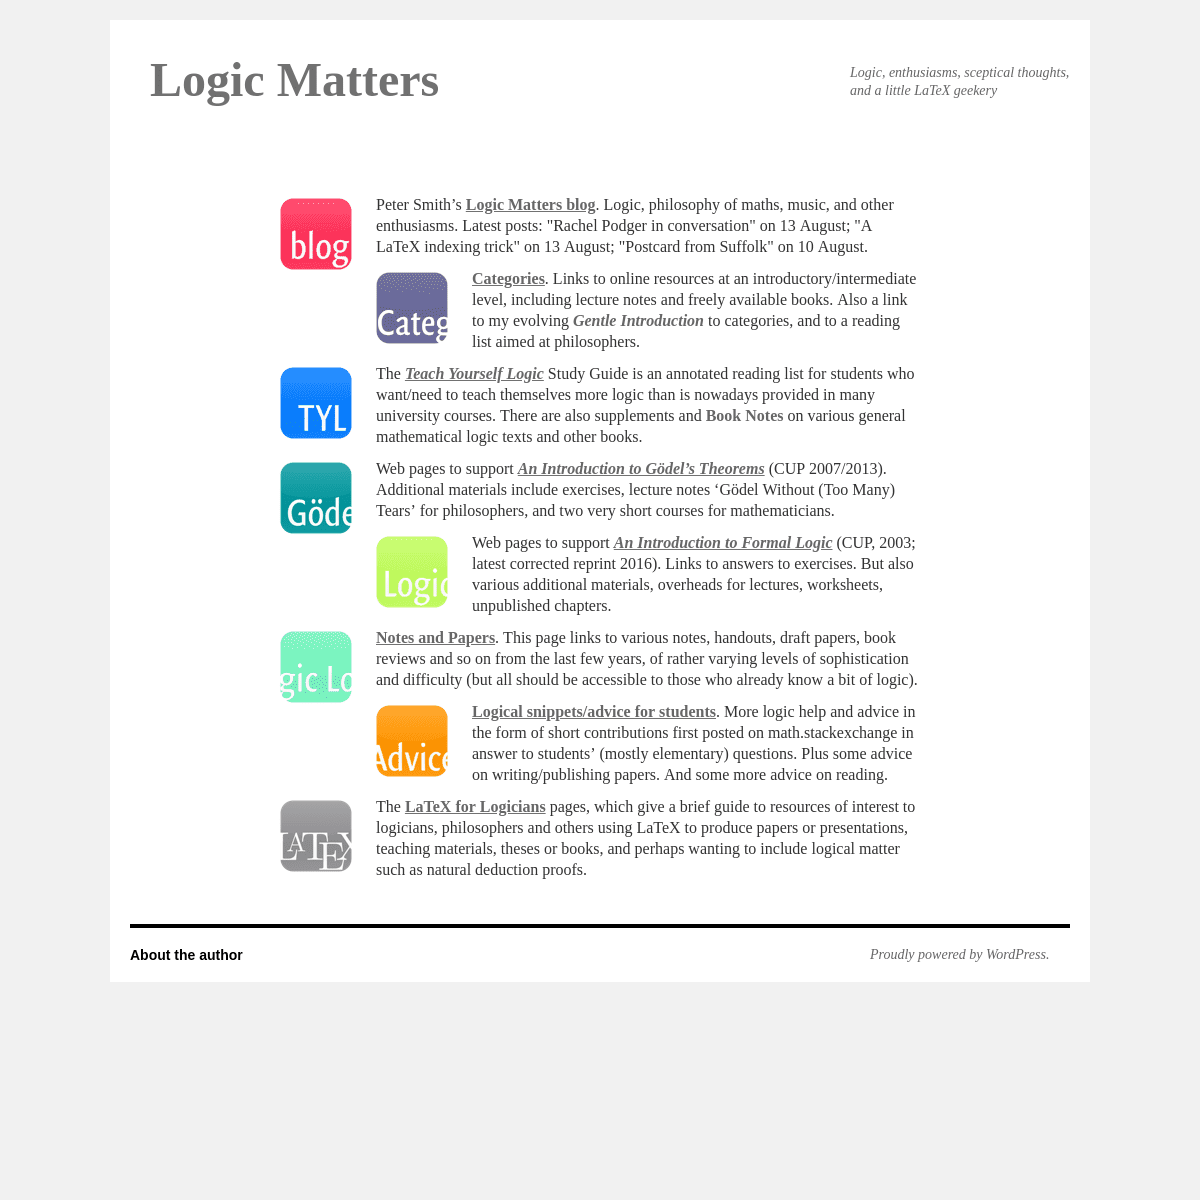 A complete backup of logicmatters.net